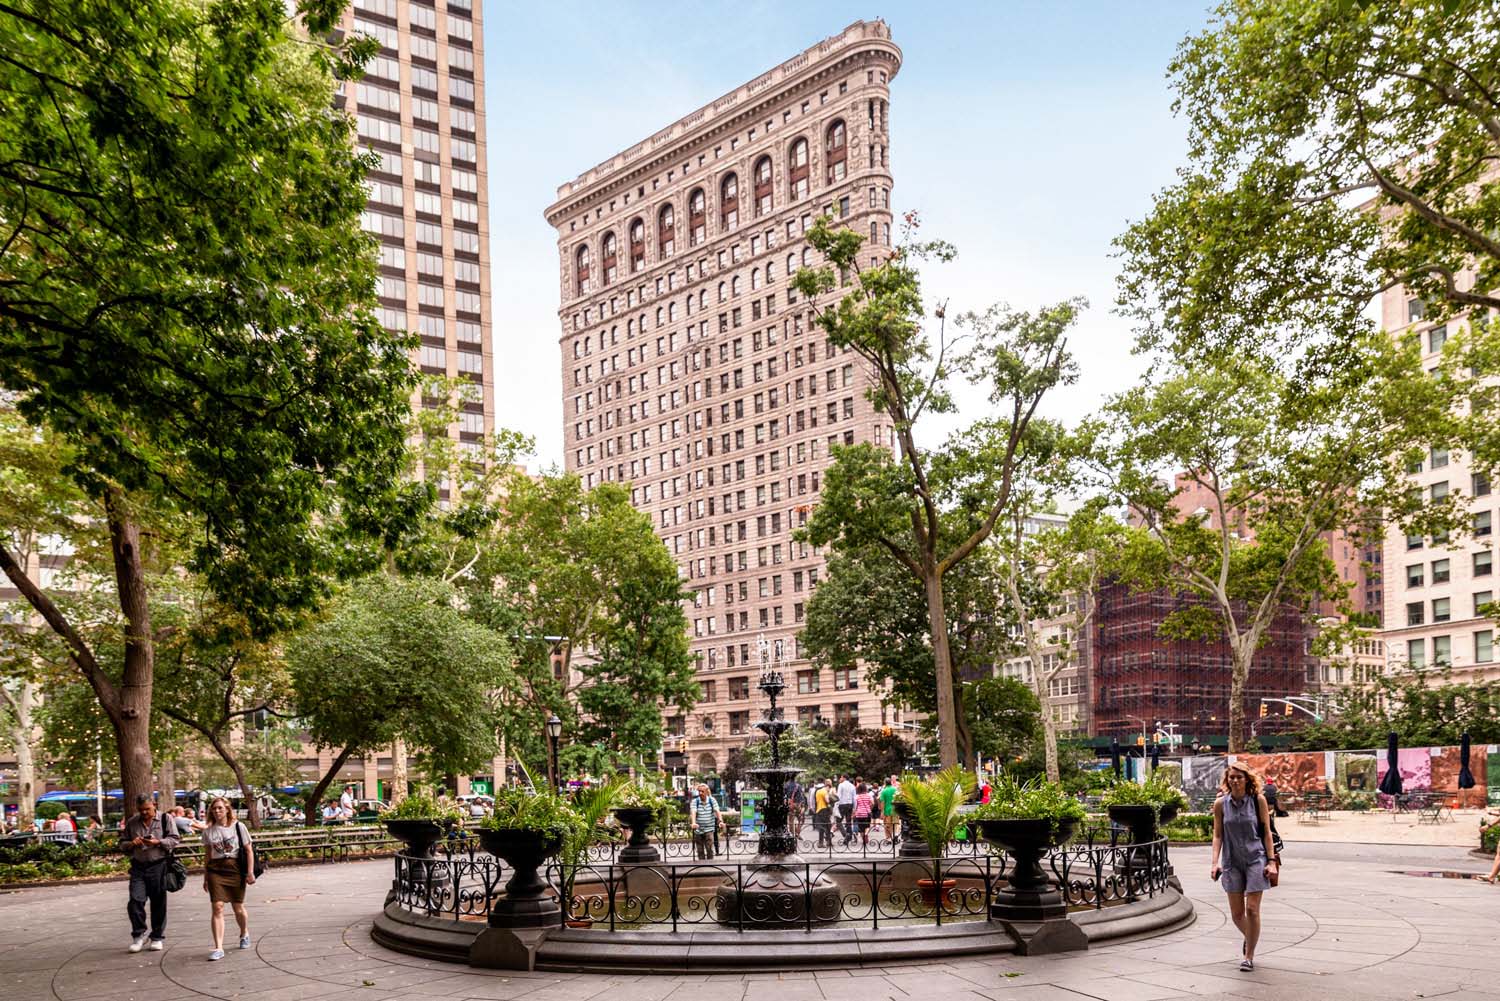 New York city park with fountain during the day with people walking and the flatiron building behind